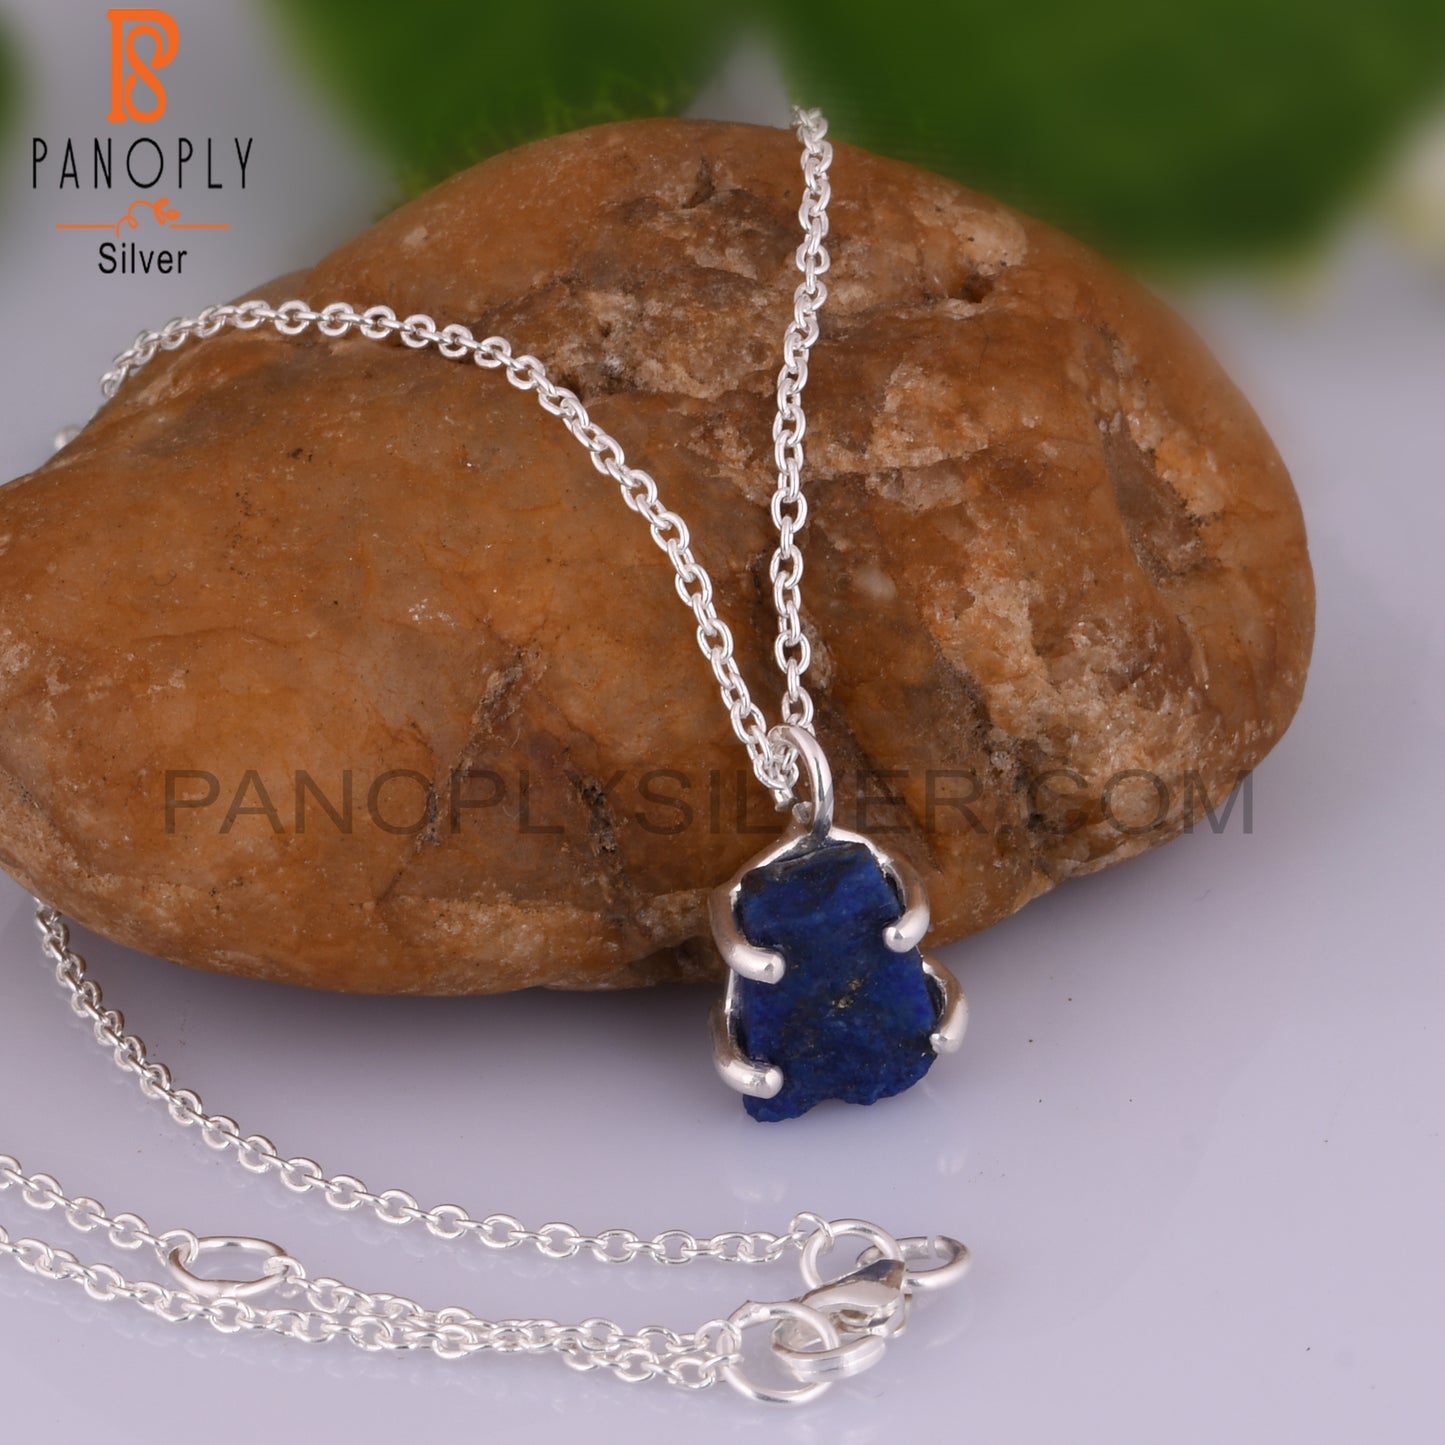 Lapis 925 Sterling Silver Necklace And Pendant Chain